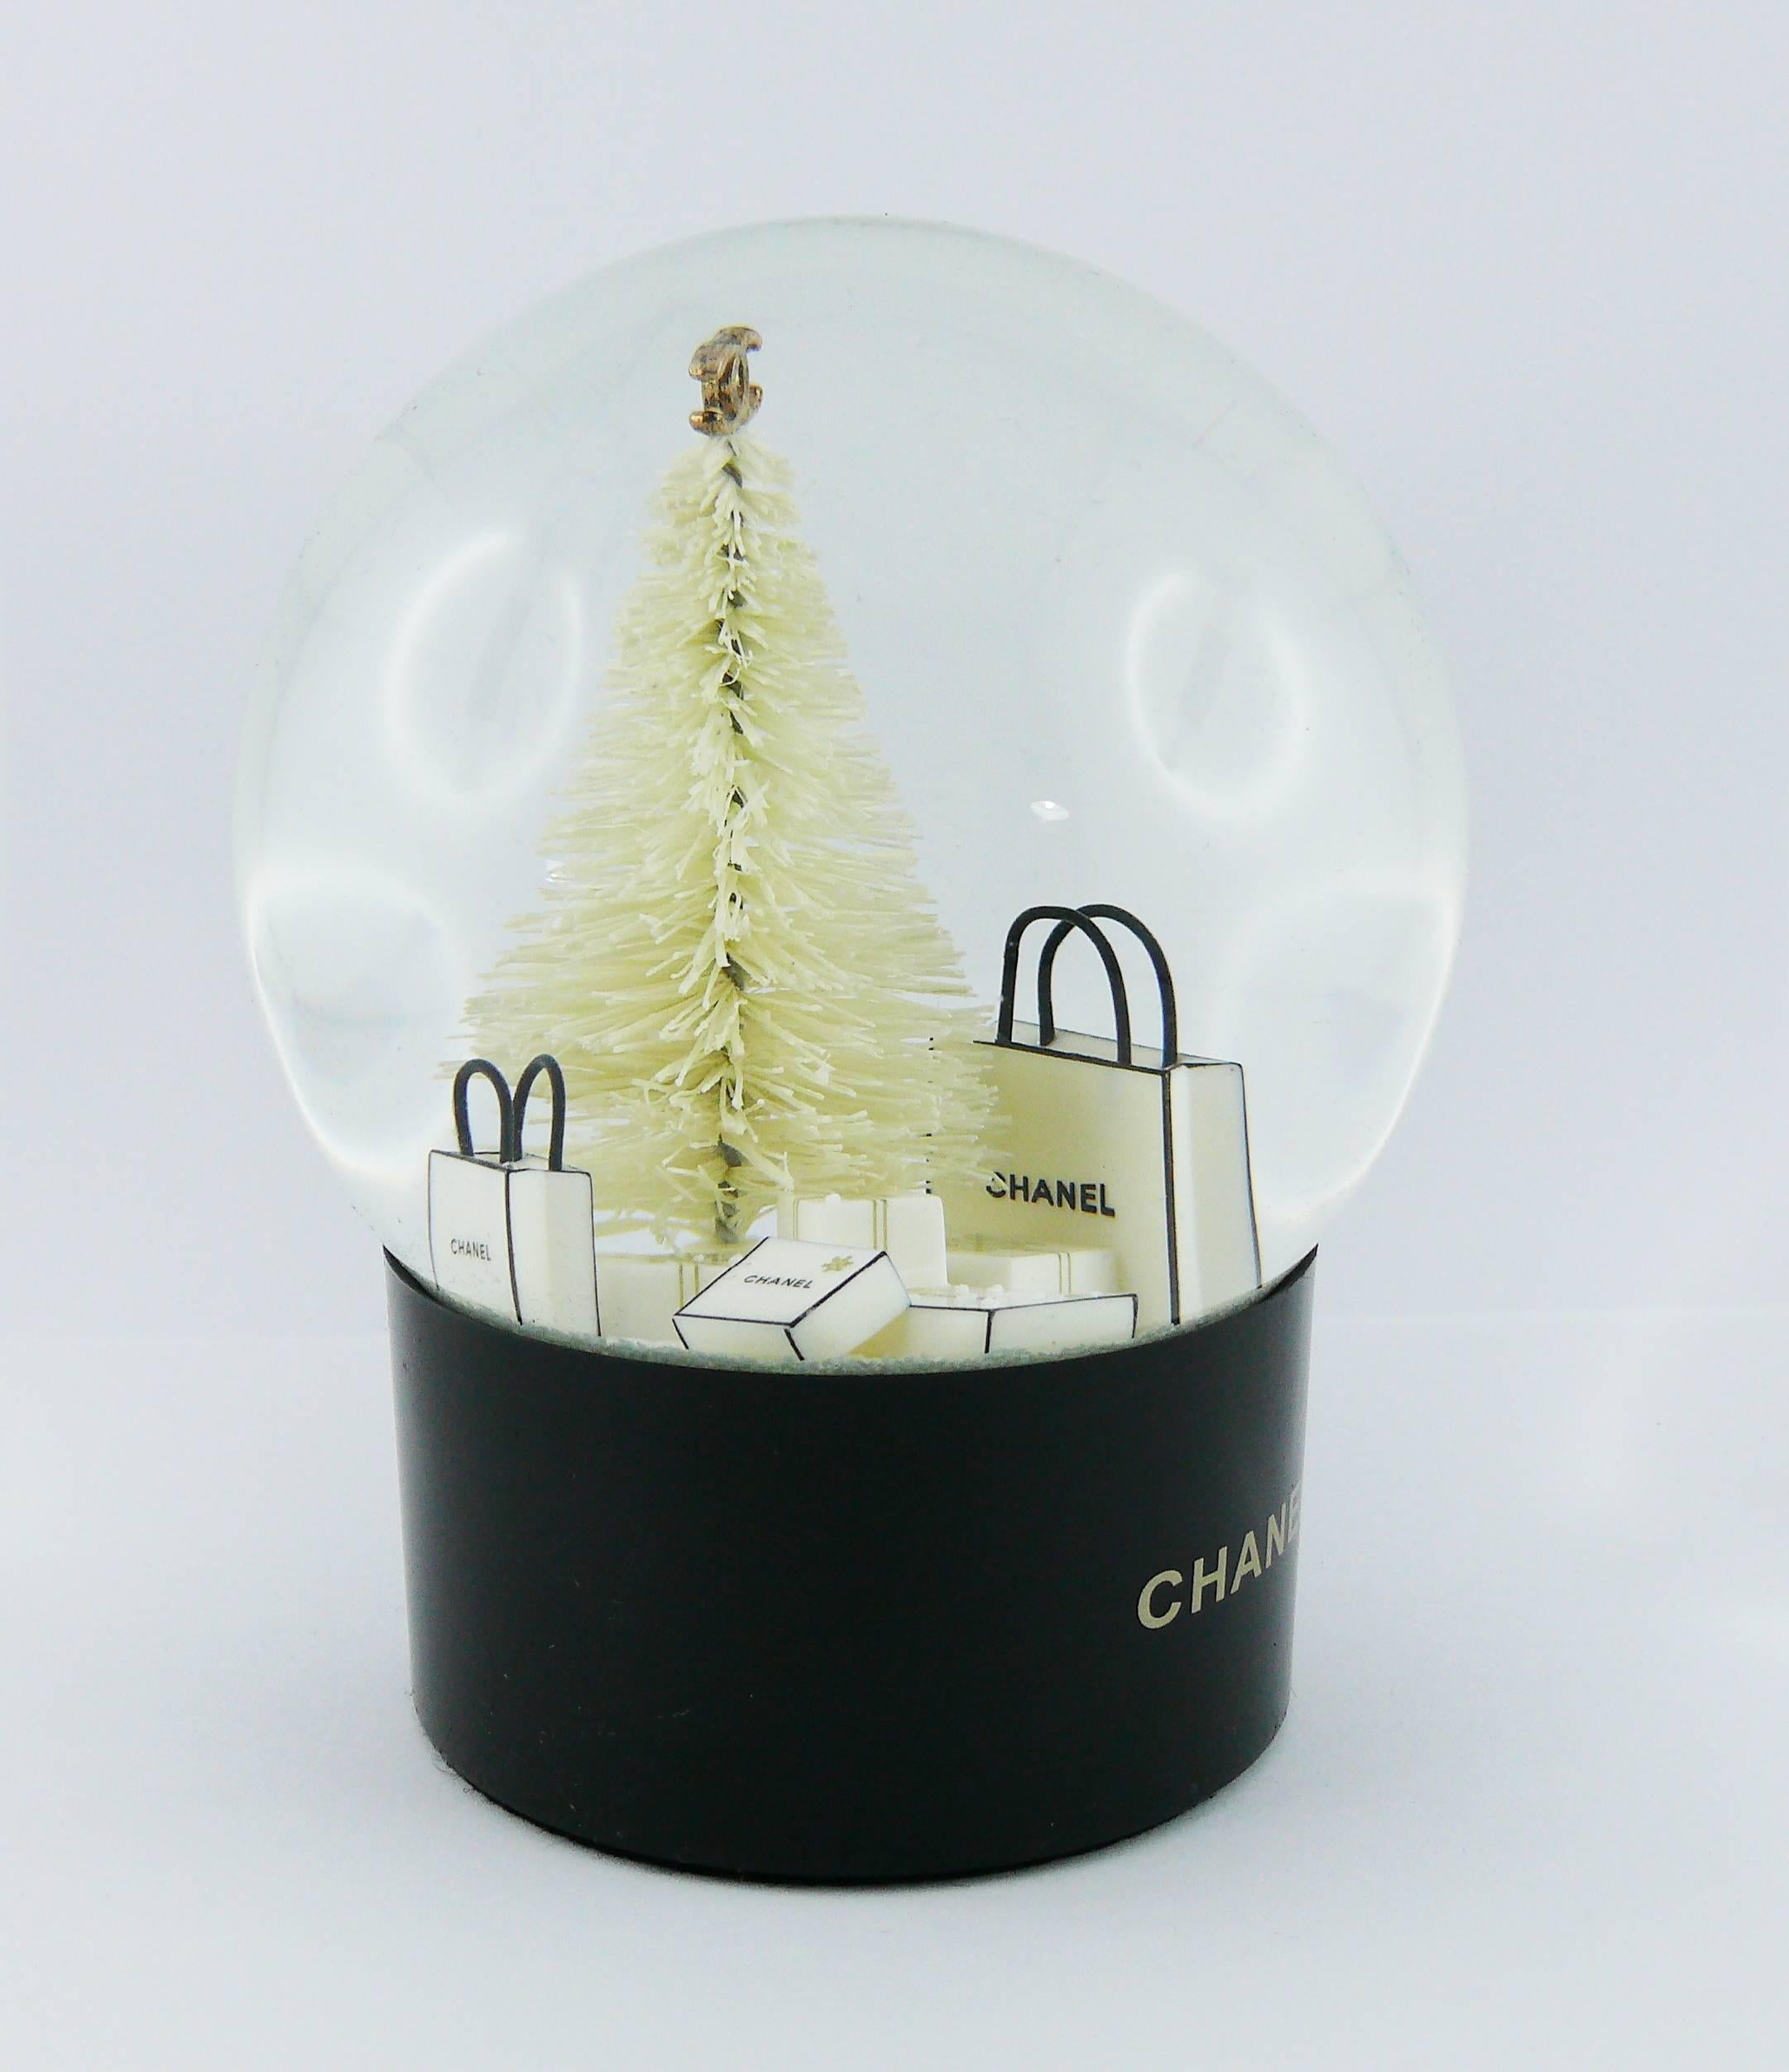 CHANEL VIP Christmas gift snow dome.

Unused condition with minor flaws (still with plastic protection at the base, just removed for photos) and original packaging (used).

Indicative measurements : height approx. 13 cm (5.12 inches) / base diameter